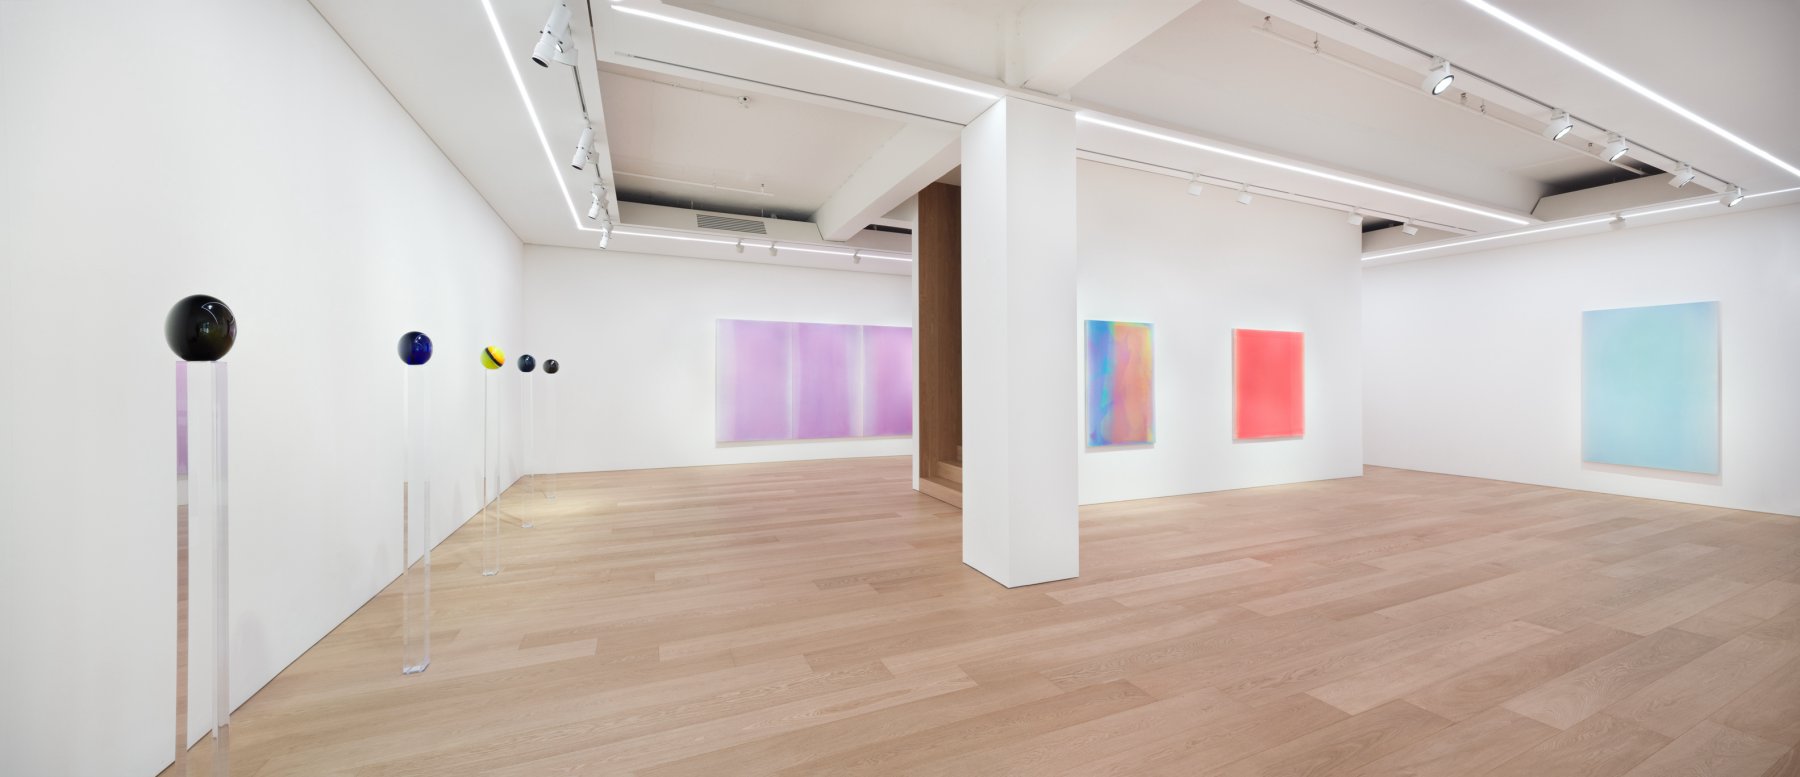 Installation image for Reflections and Refractions, at Lehmann Maupin